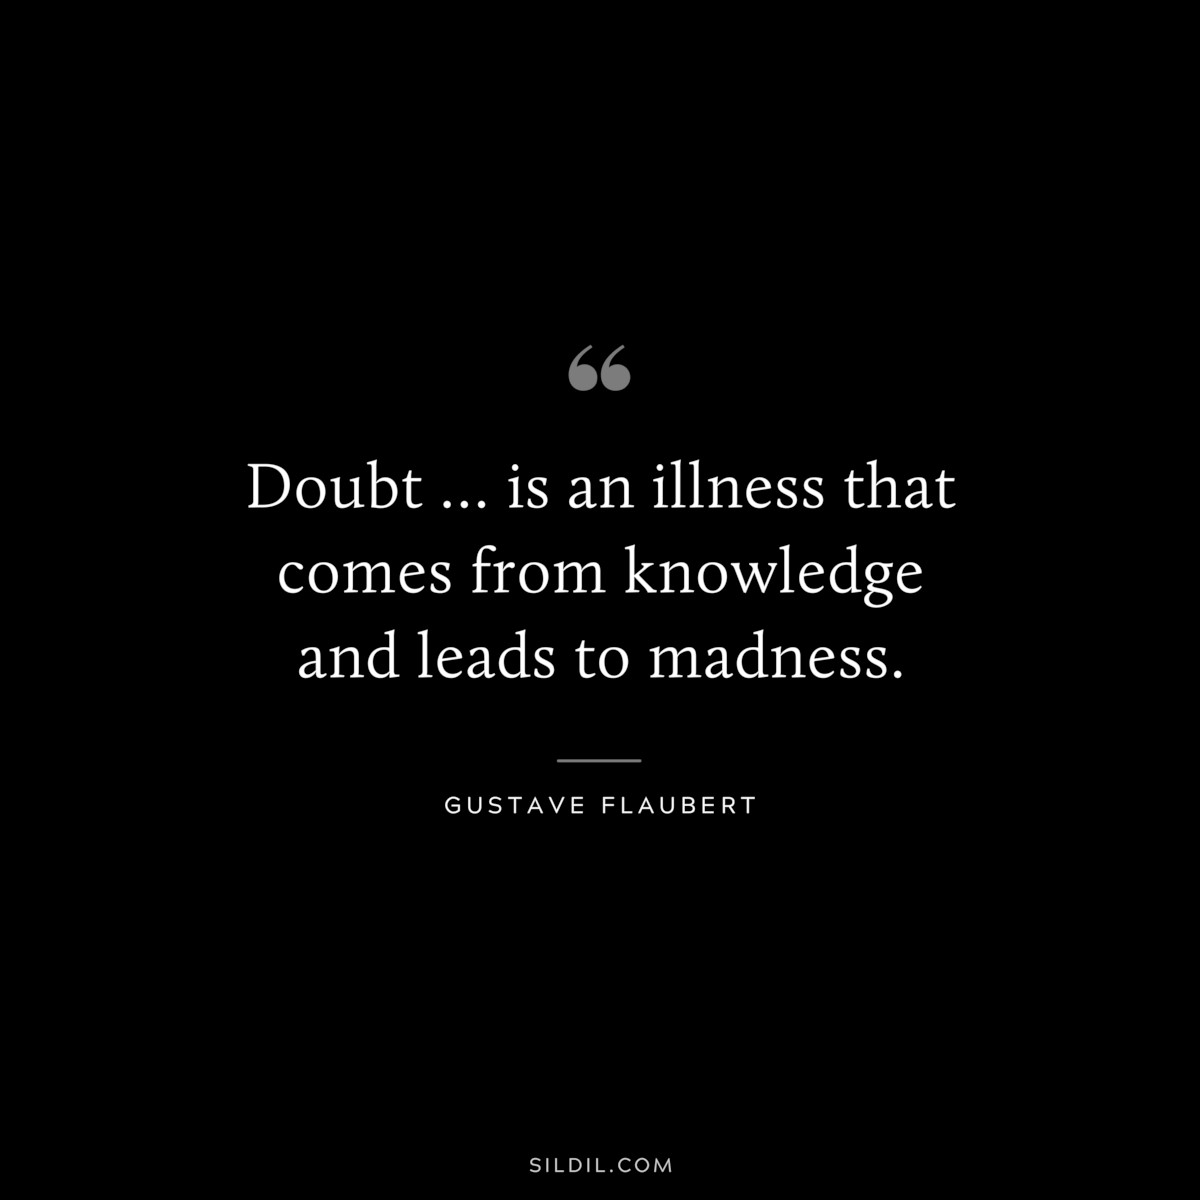 Doubt … is an illness that comes from knowledge and leads to madness. ― Gustave Flaubert